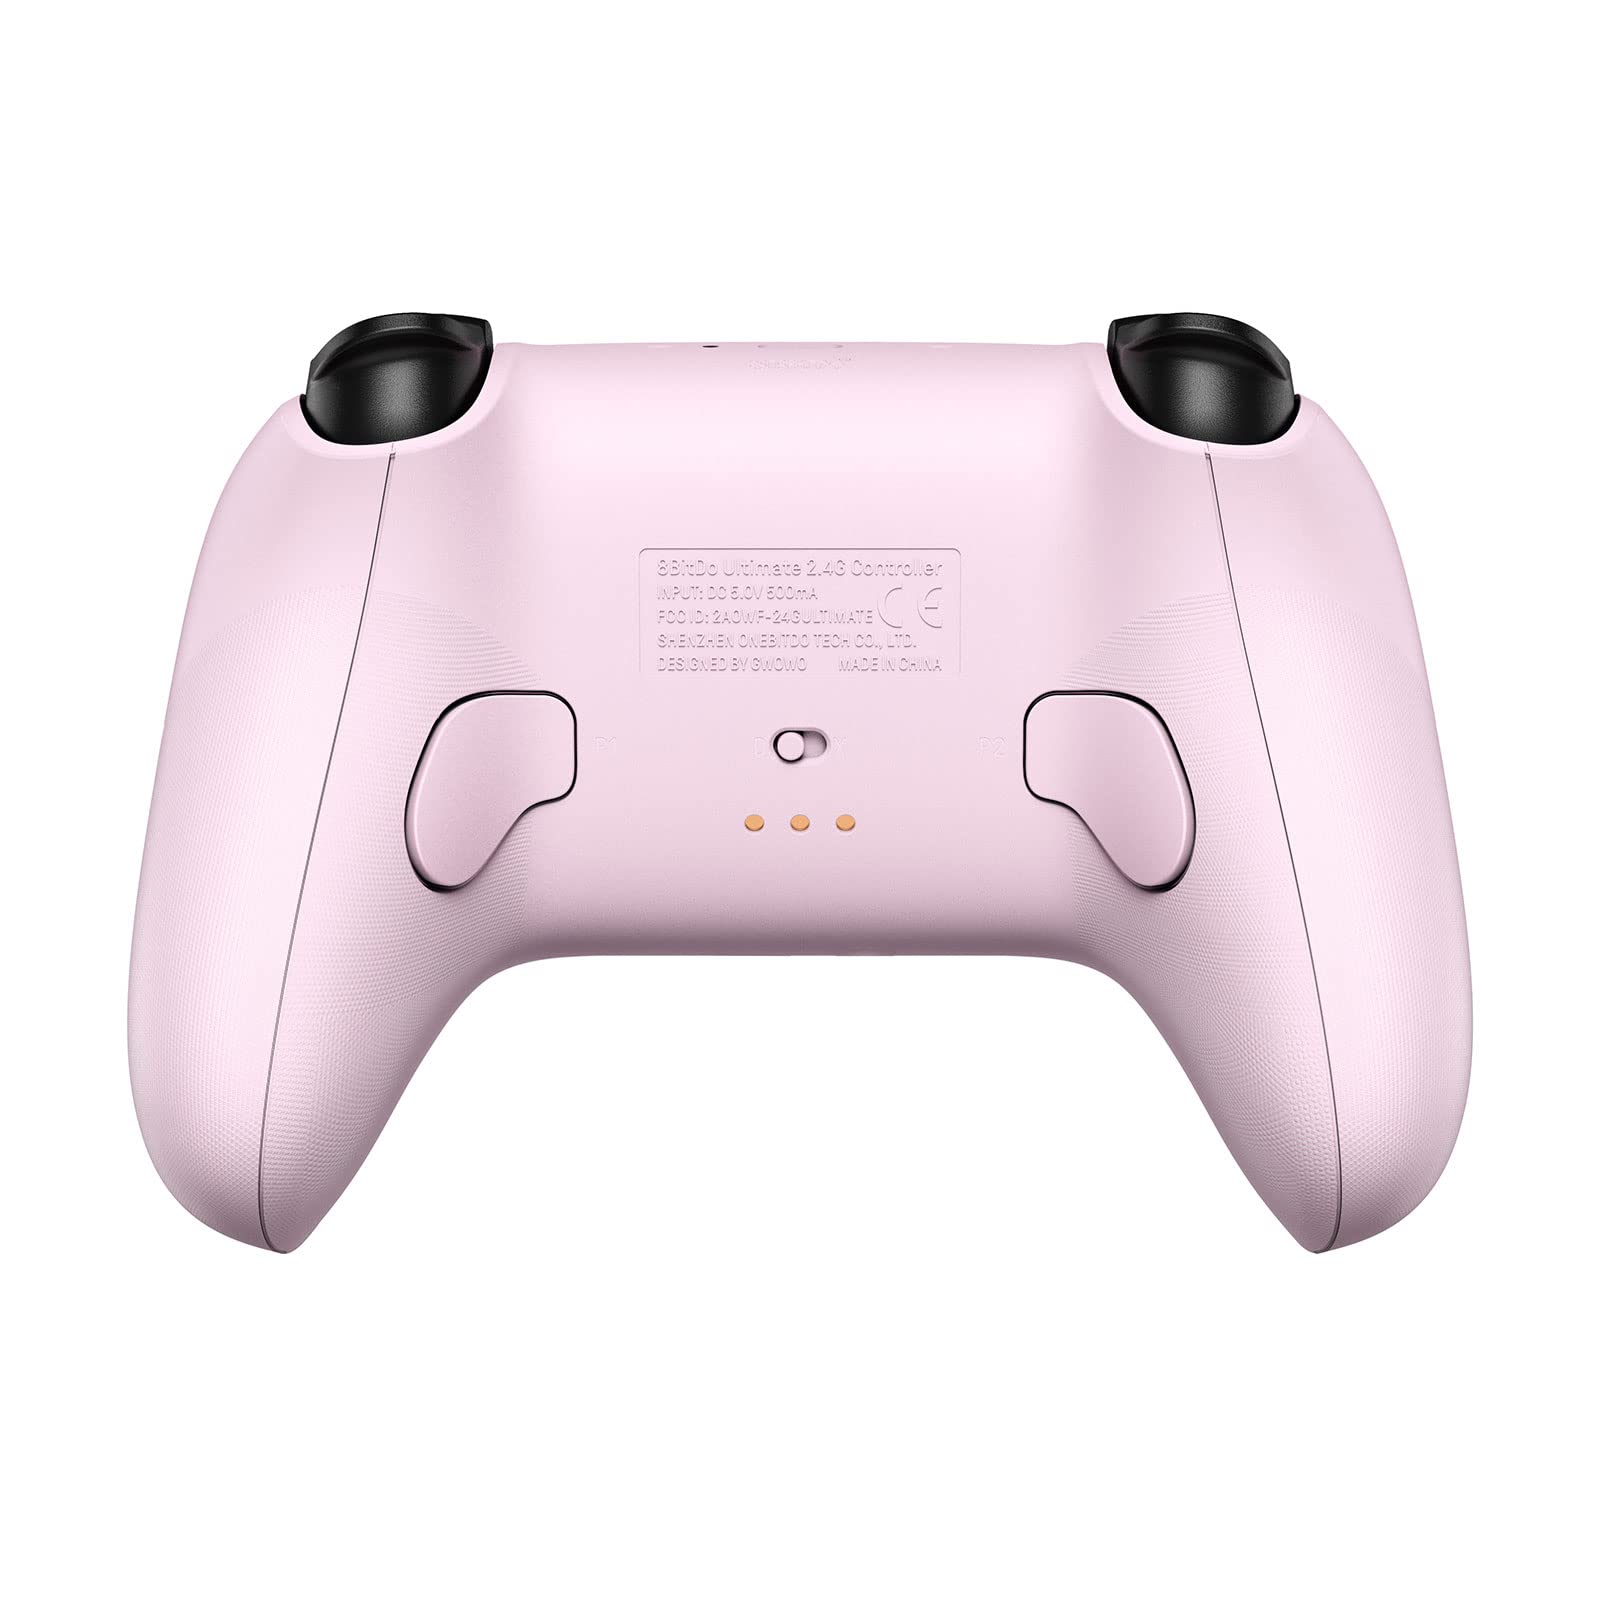 8Bitdo Ultimate 2.4g Wireless Controller With Charging Dock, 2.4g Controller for PC, Android, Steam Deck & iPhone, iPad, macOS and Apple TV (Pastel Pink)